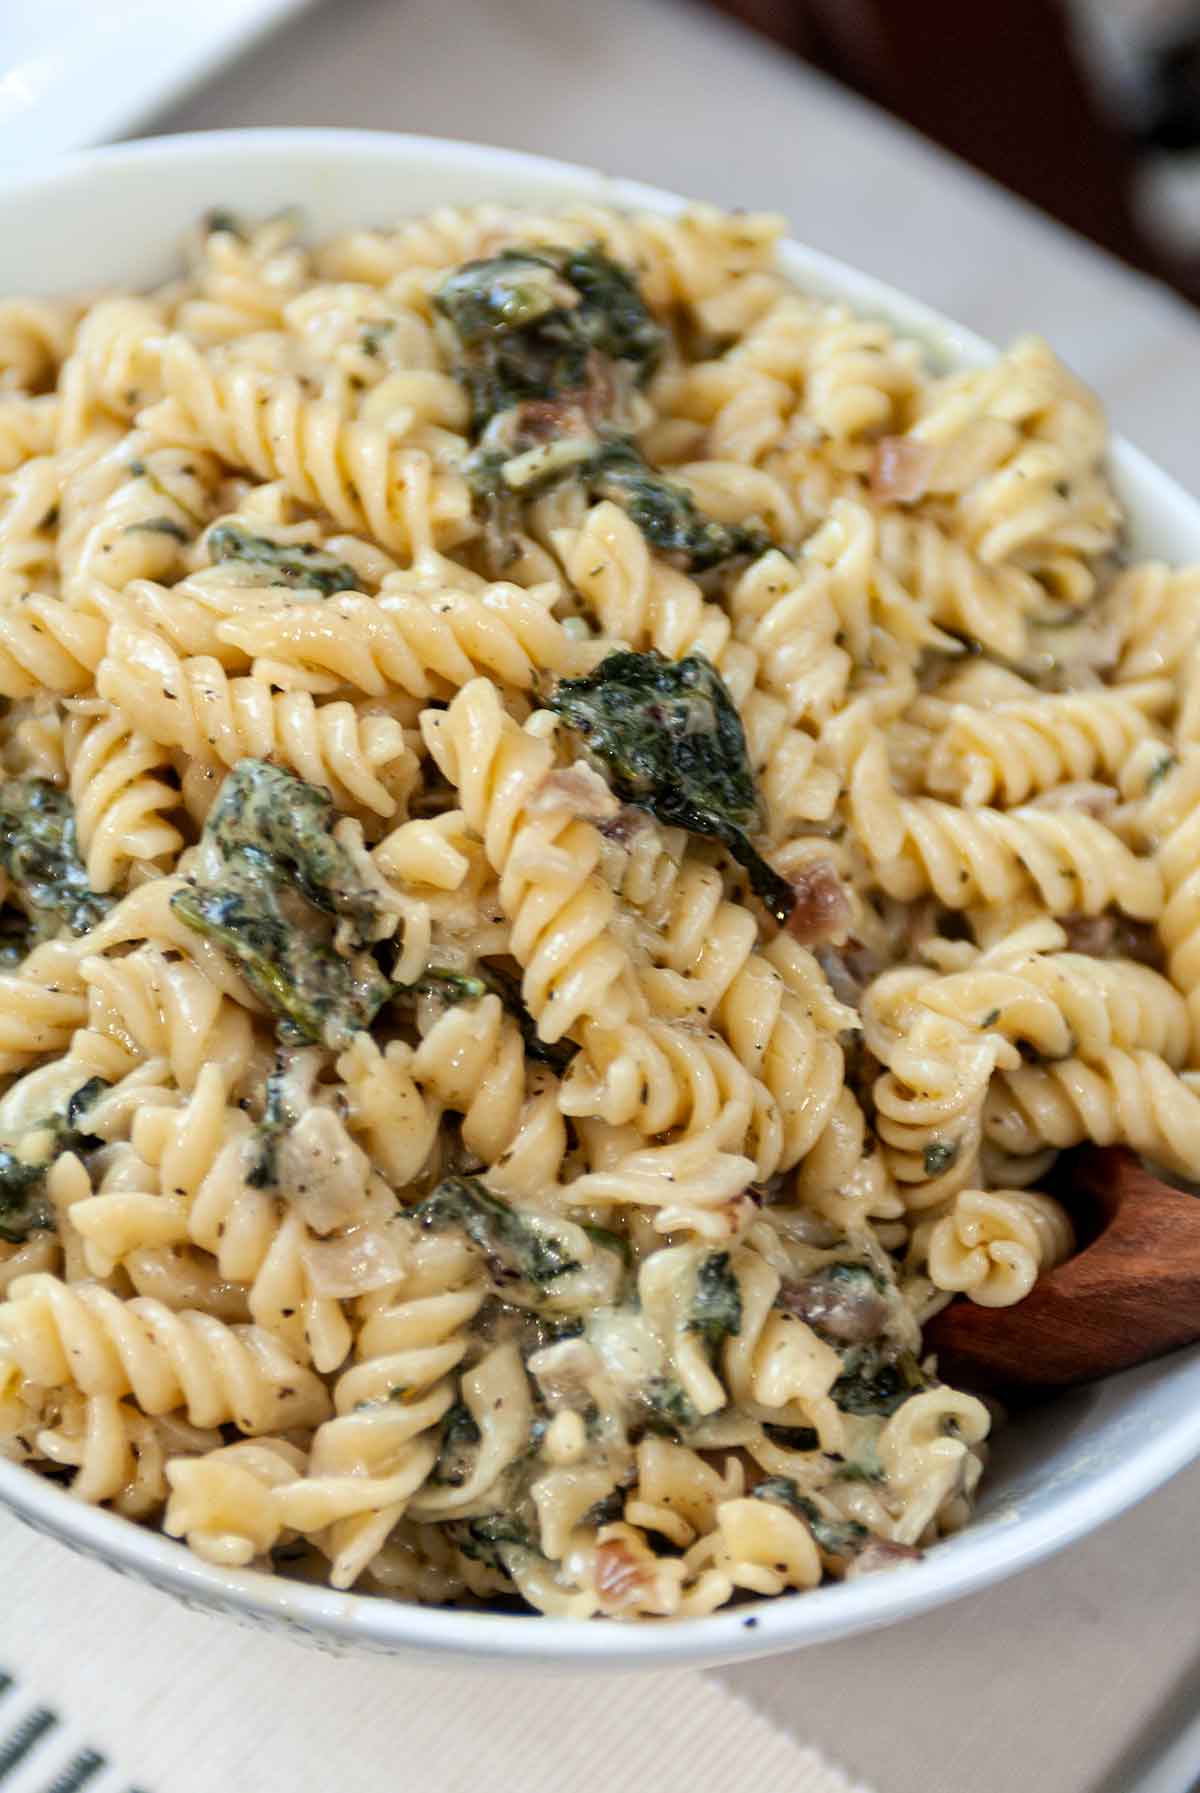 A bowl full of pasta with spinach with a wooden spoon.